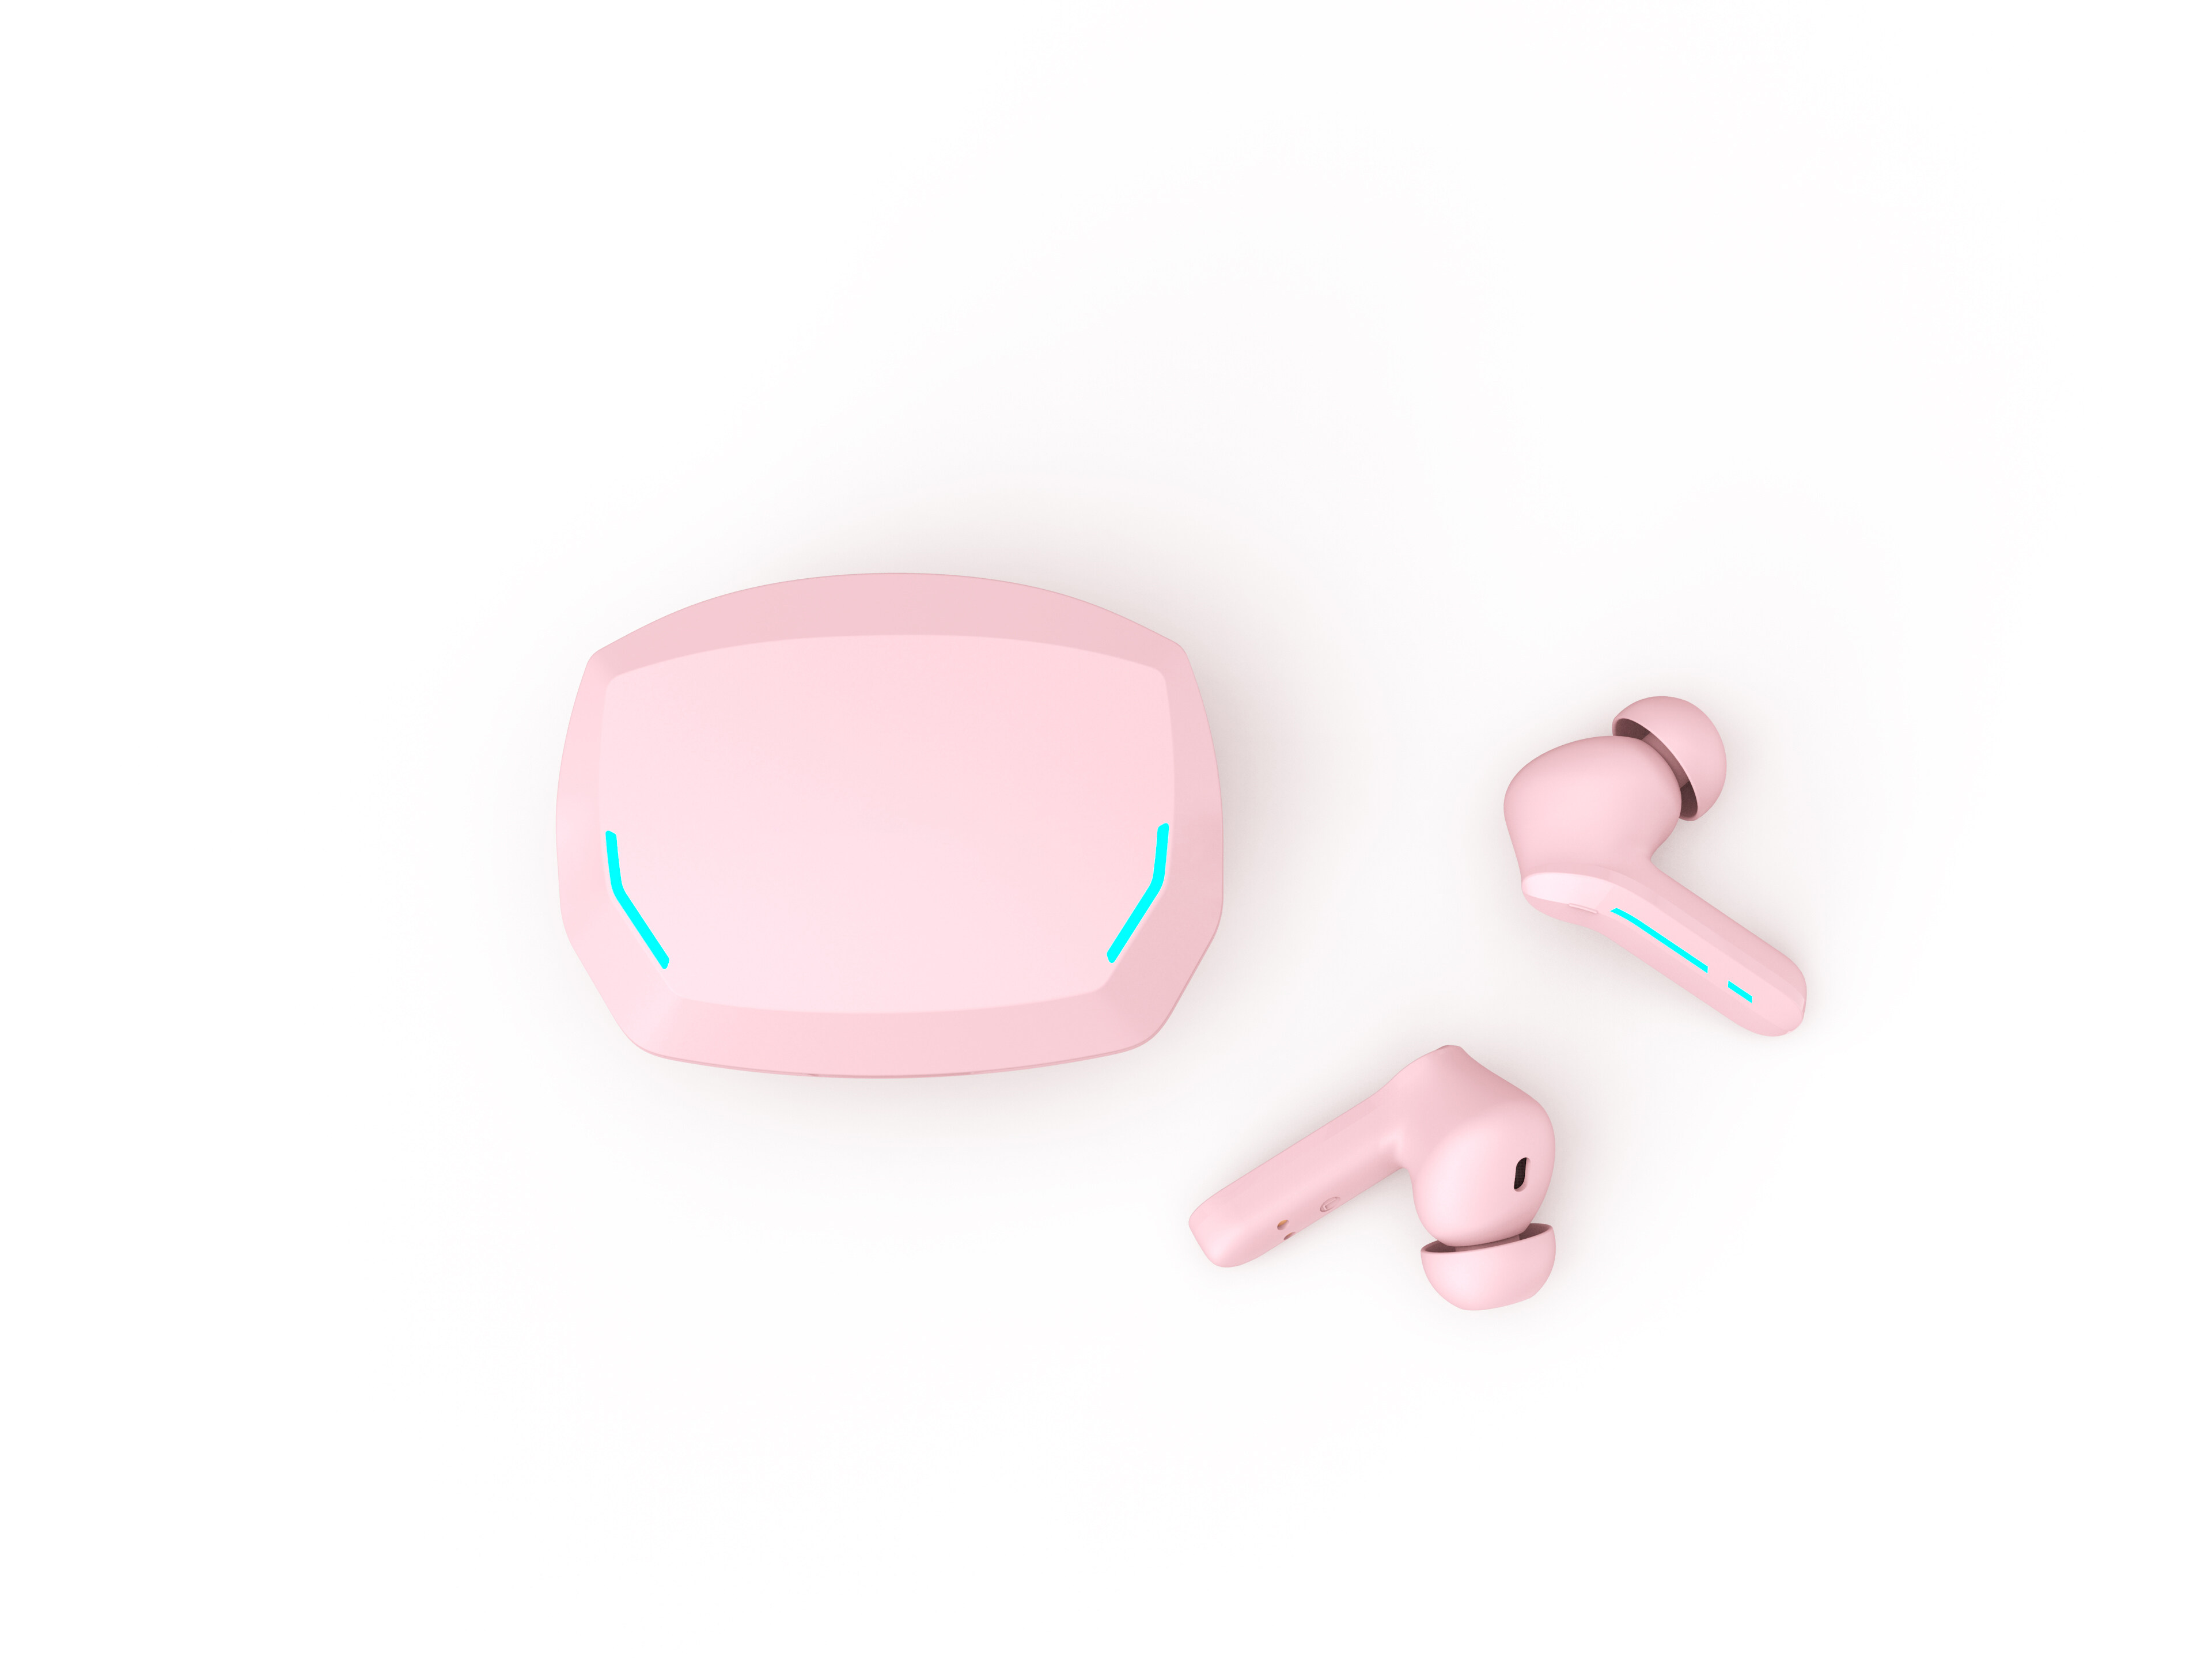 Happyaudio; tws factory; private label tws; china tws factory; OEM Audio Products; Wireless Earbuds Manufacturer; Custom tws manufacturer China;tws technology; audio manufacturing; tws model; budget tws